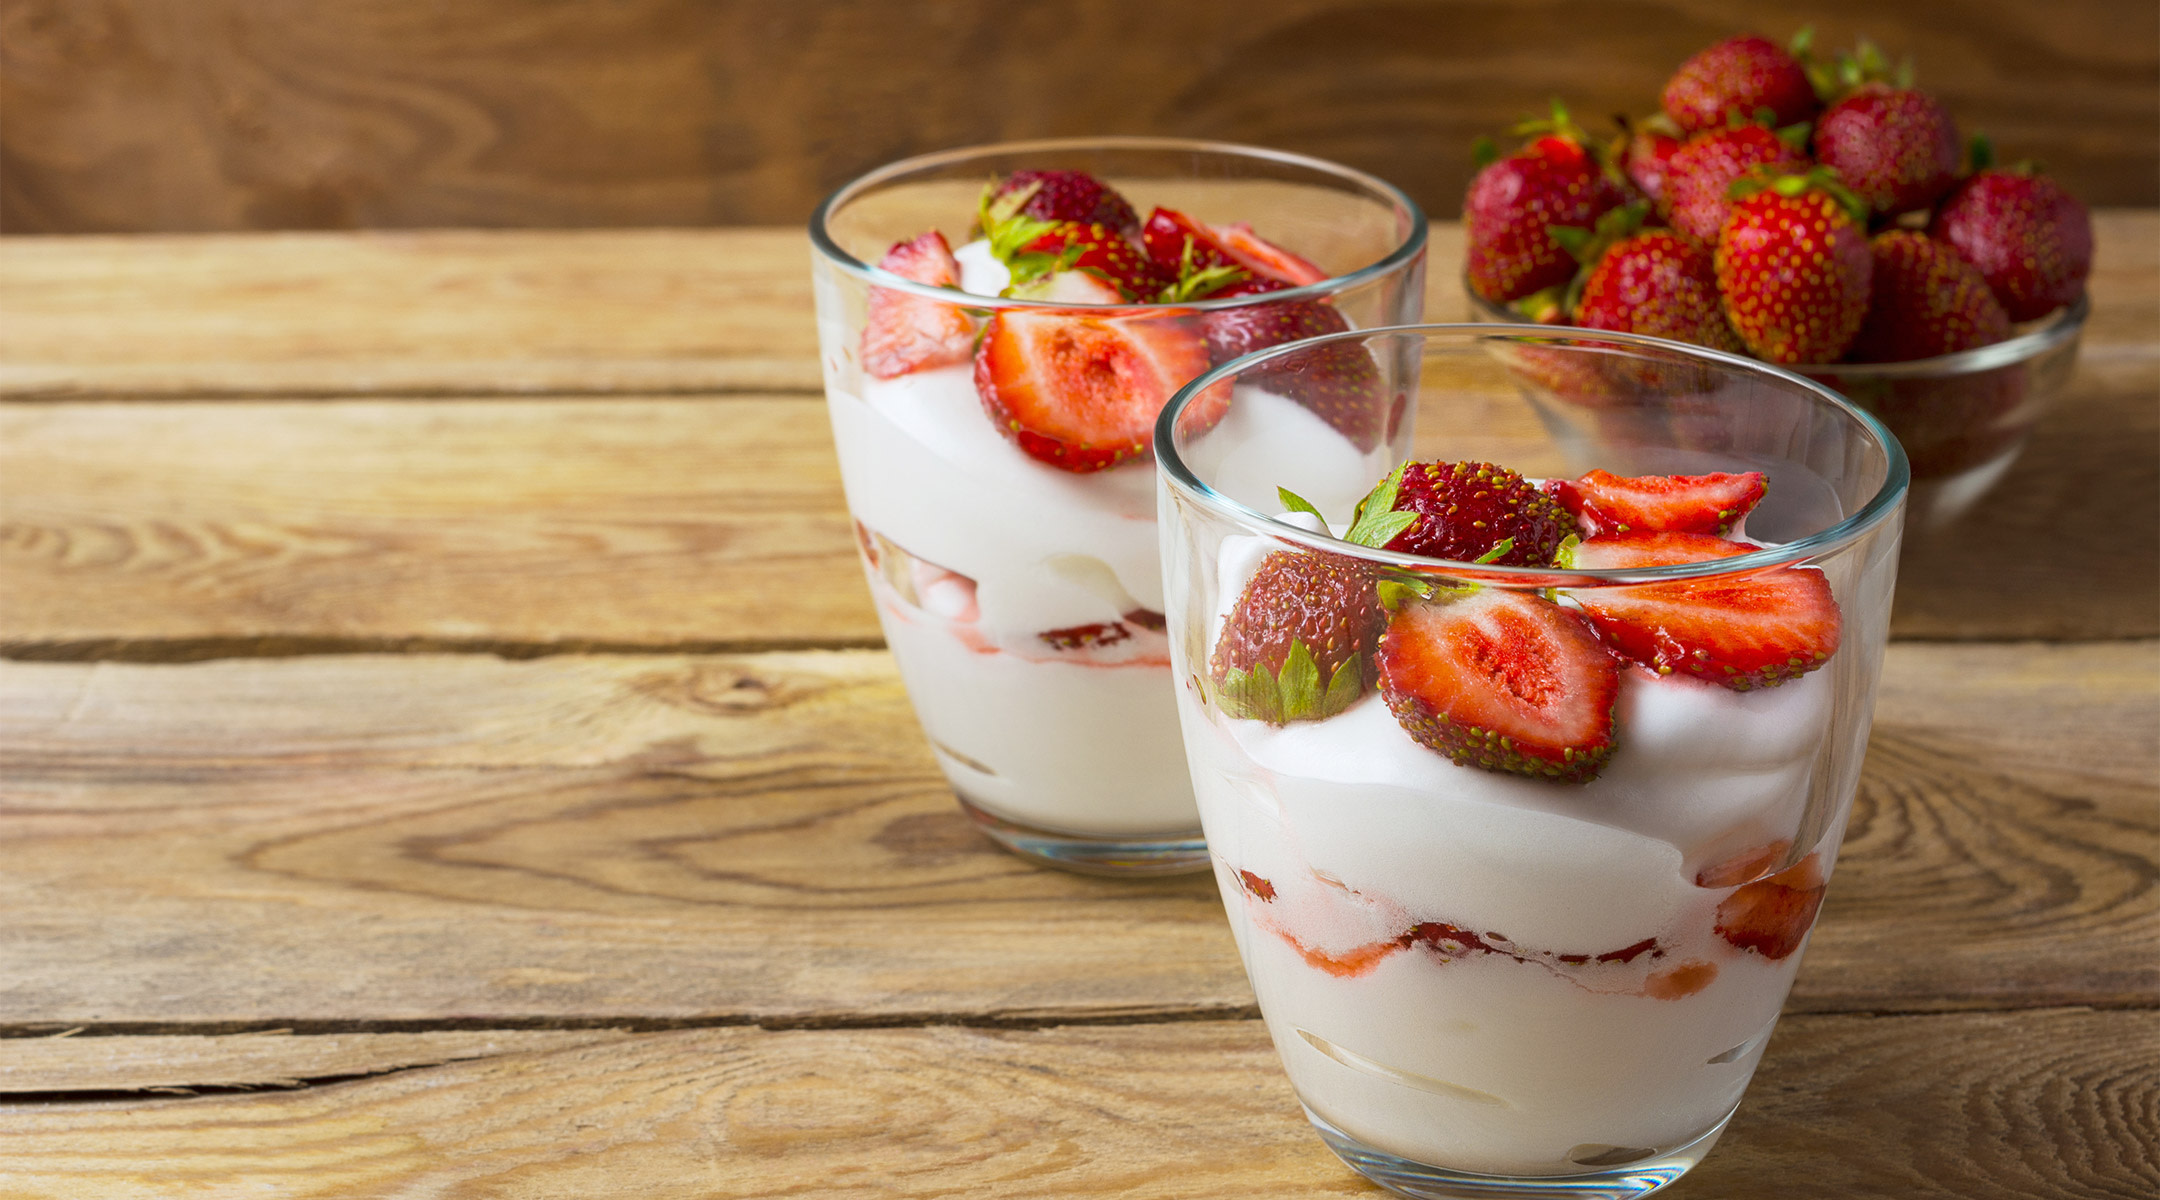 Healthy snack for pregnant women, yogurt and strawberries